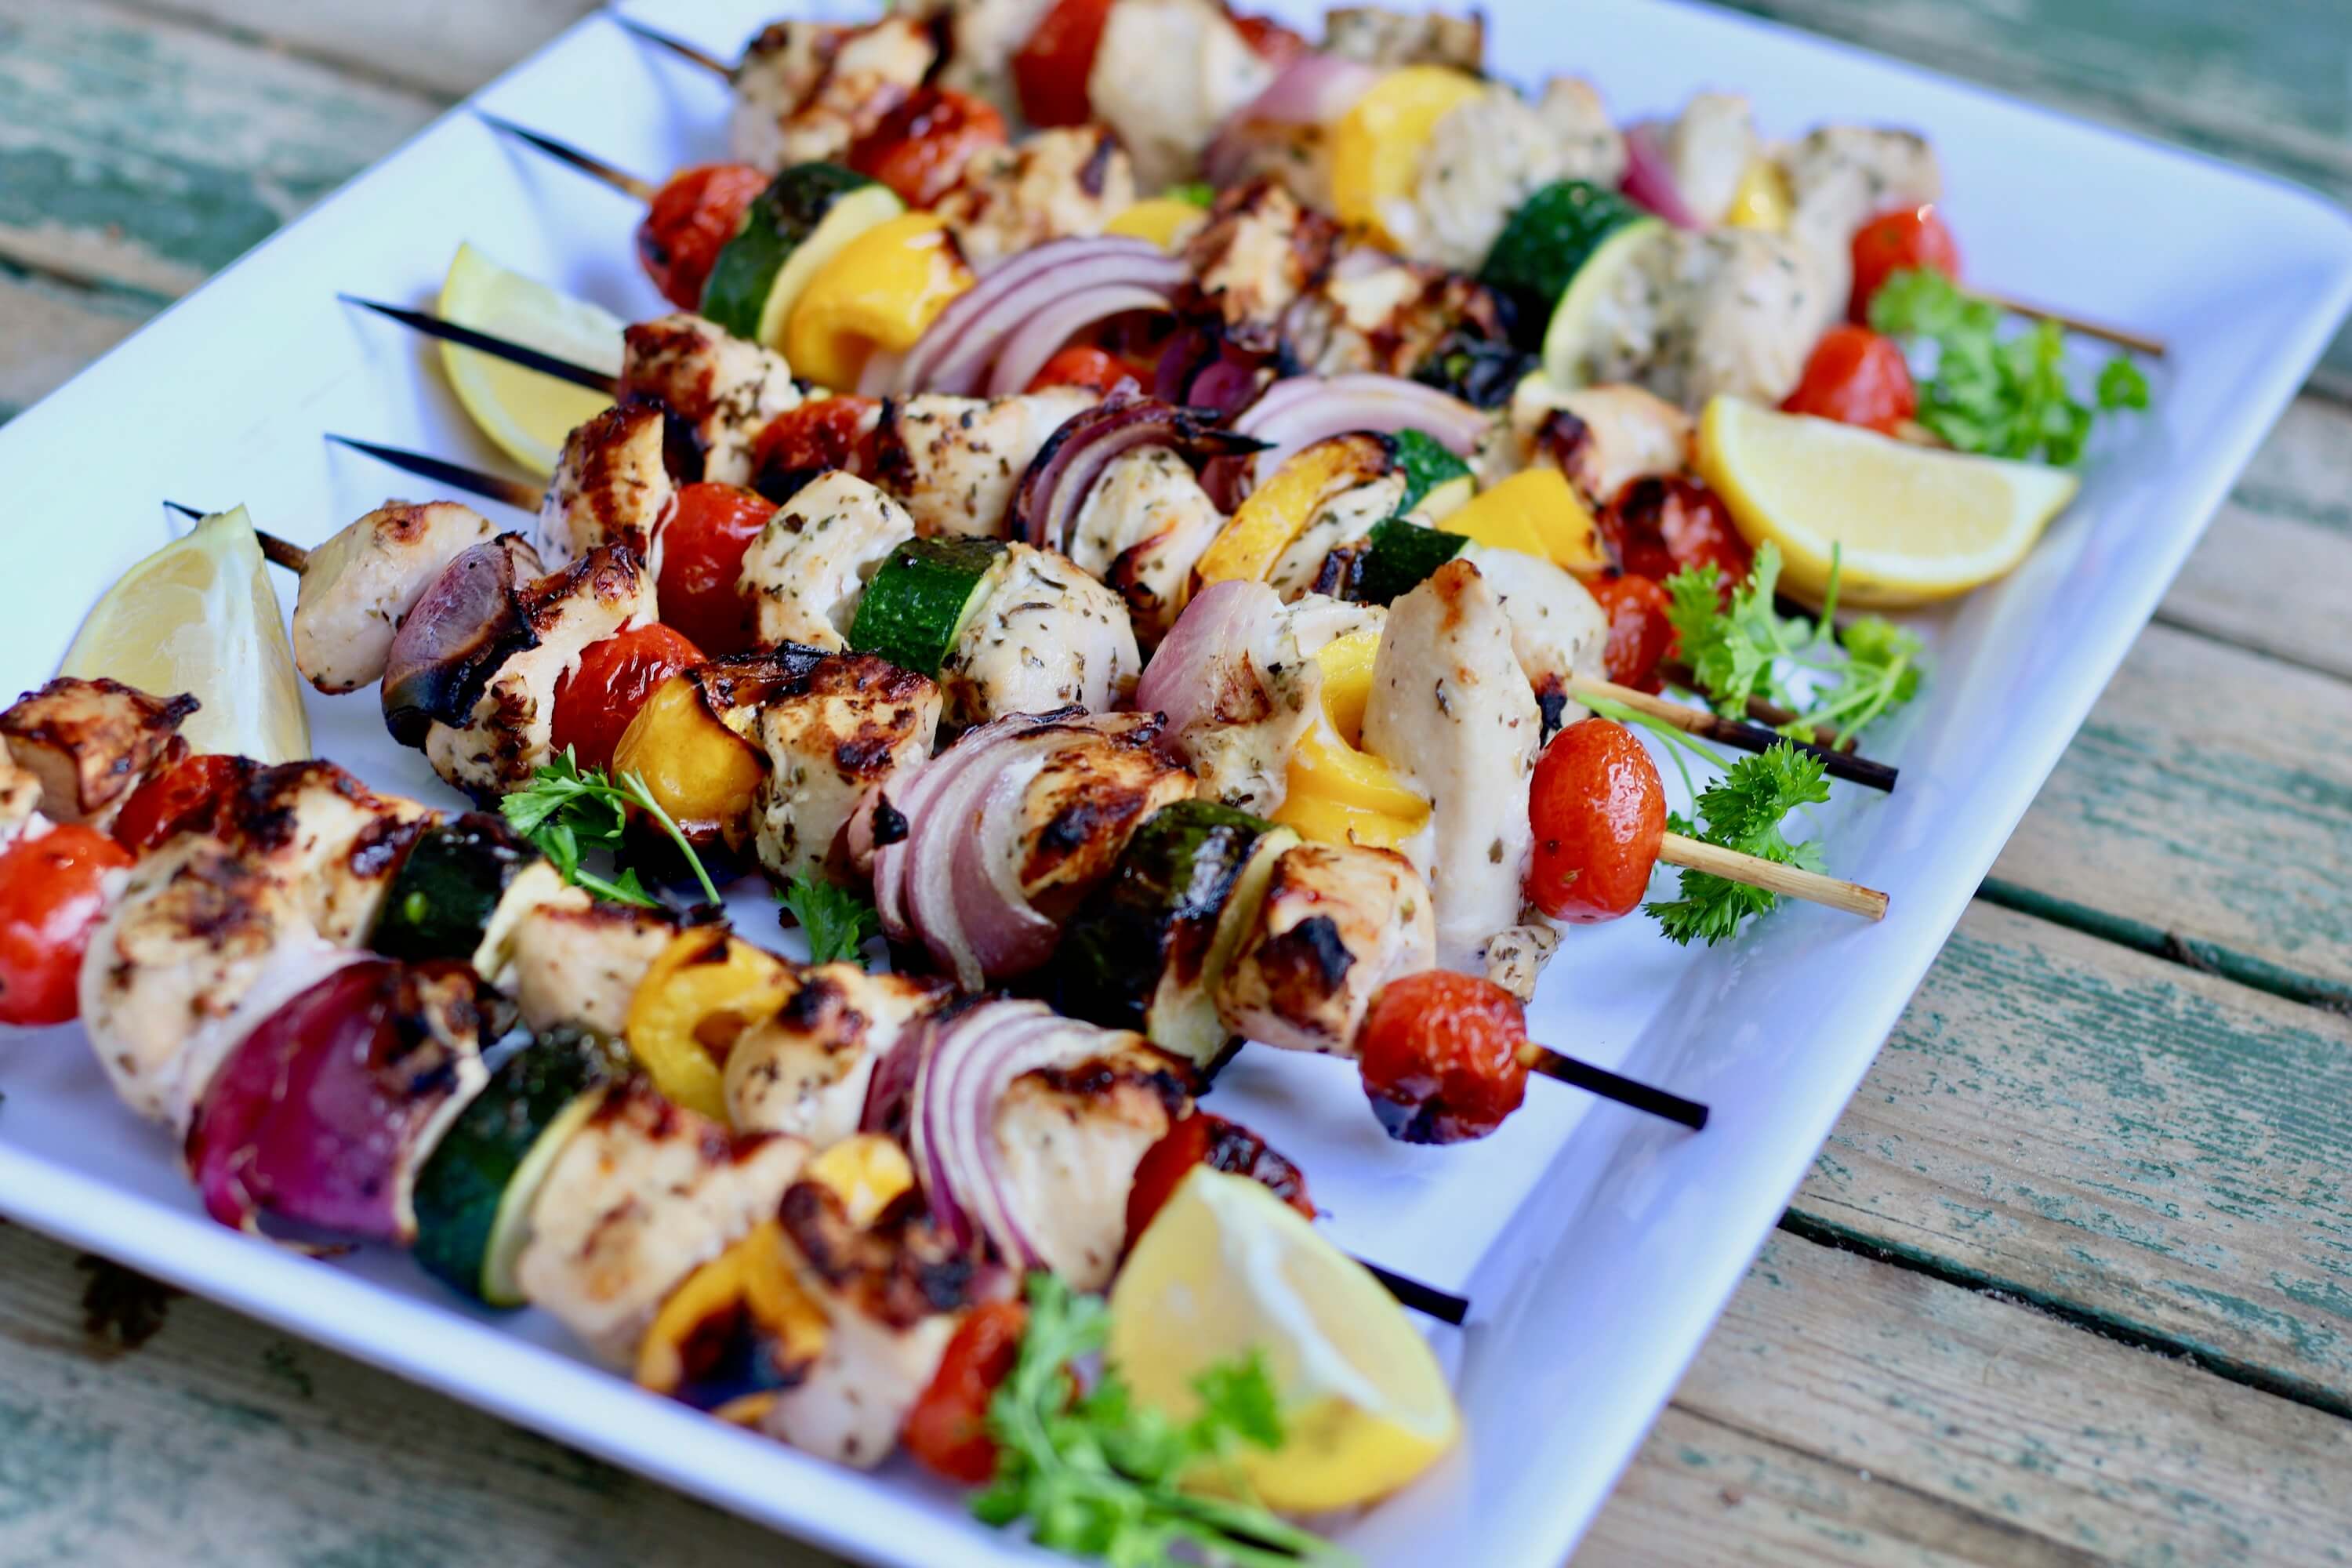 20 Meal Ideas Your Clients Can Grill This Summer: Grilled Mediterranean Chicken Kabobs